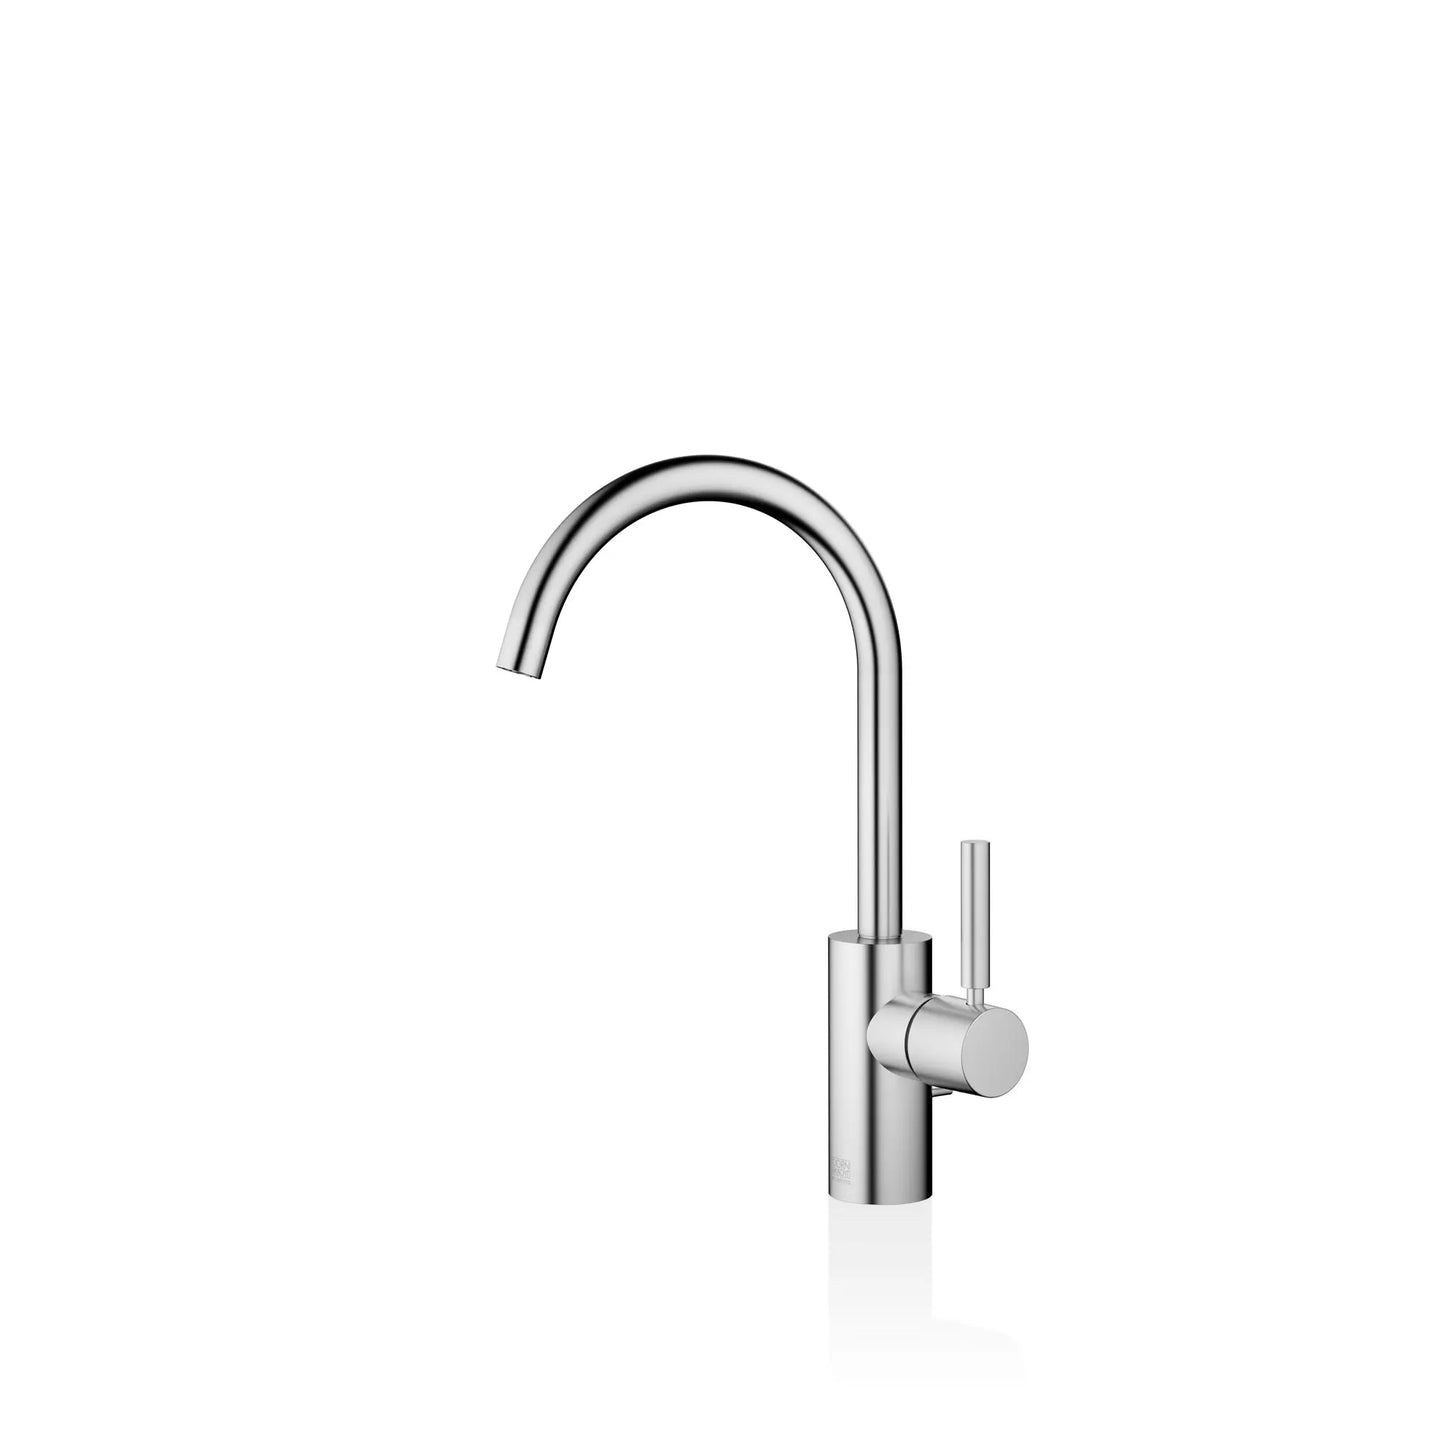 META Single-lever basin mixer with pop-up waste